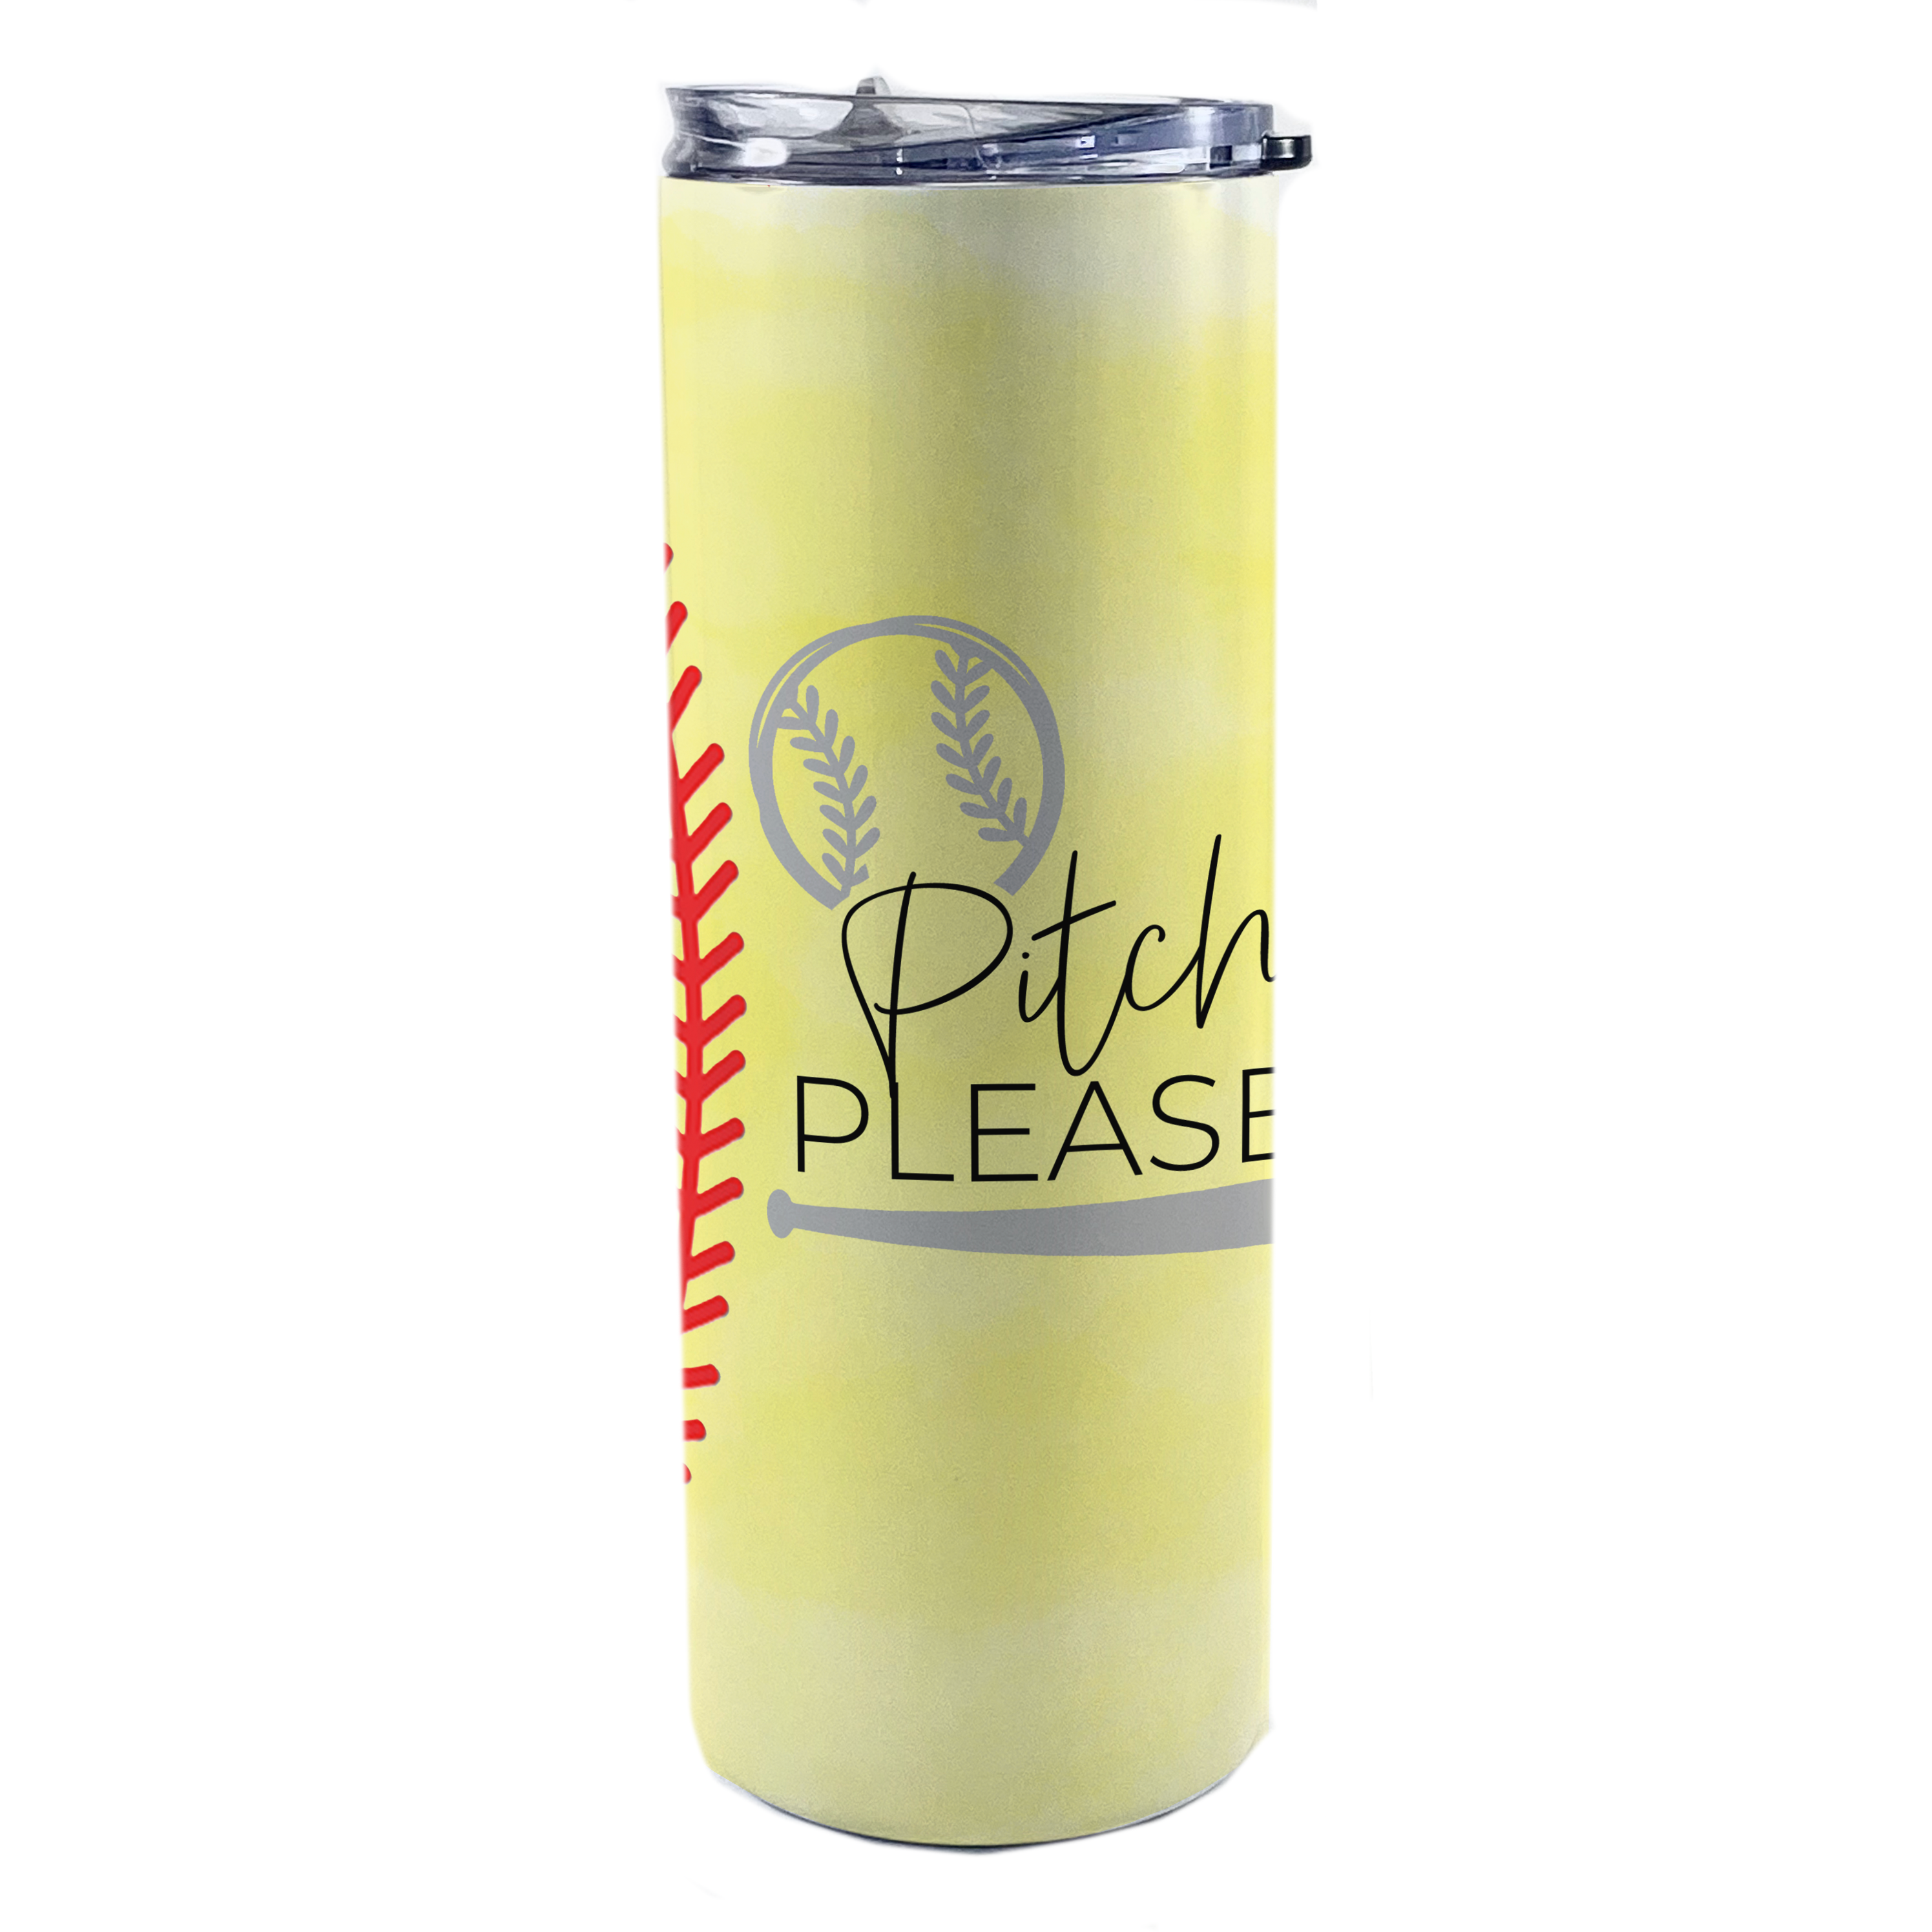 Sports Collection (Pitch Please - Softball) 20 Oz Stainless Steel Travel Tumbler with Straw